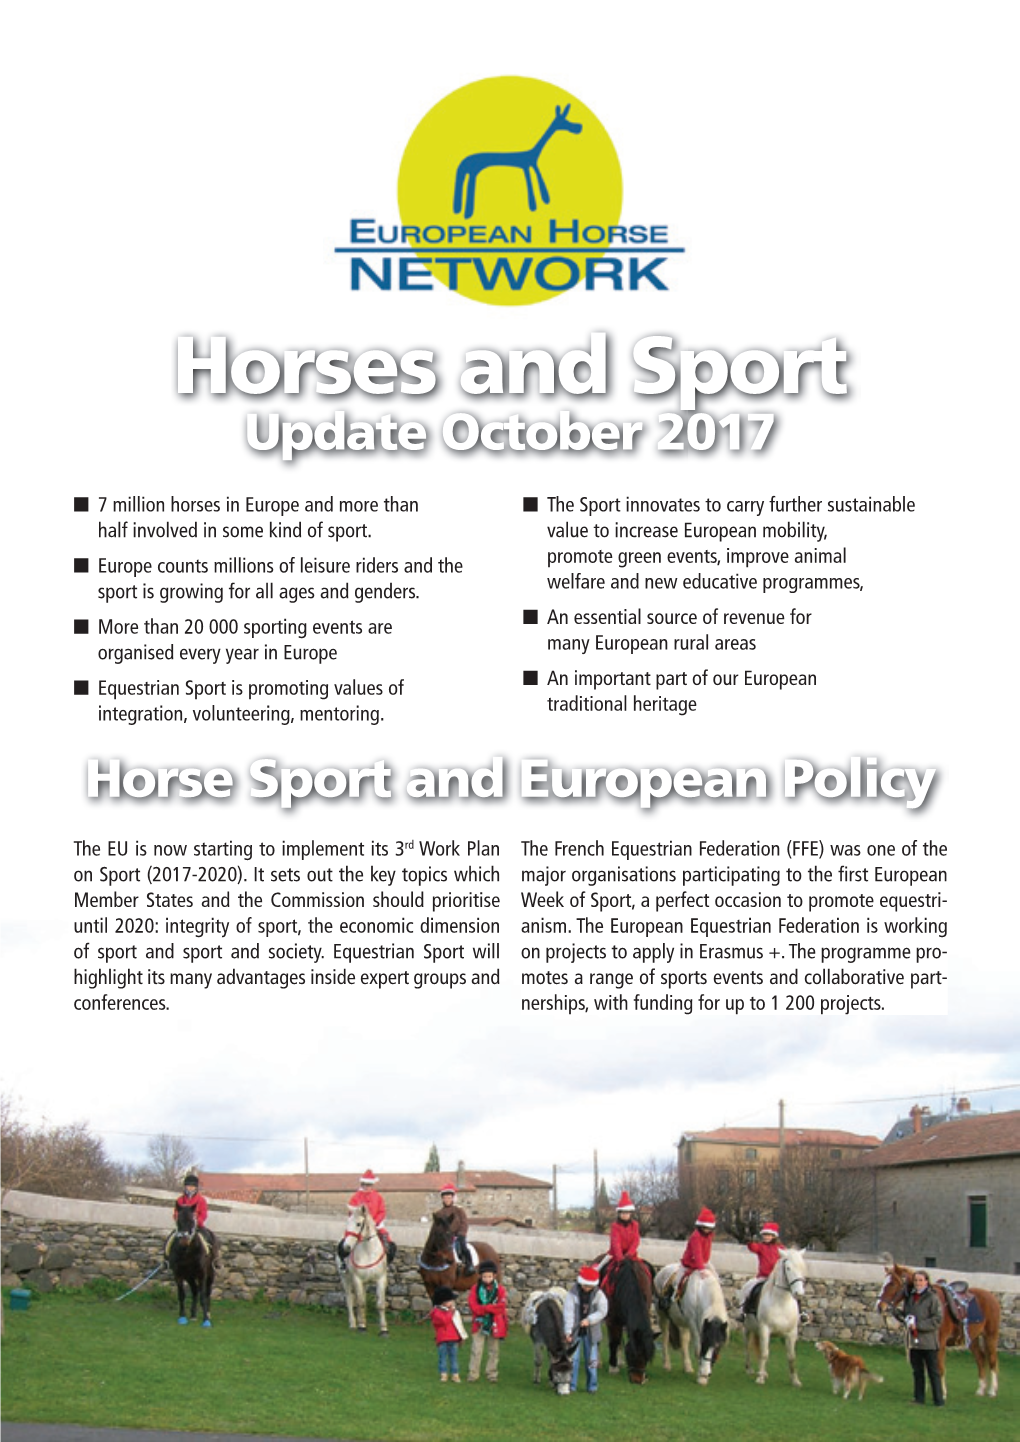 Horses and Sport Update October 2017